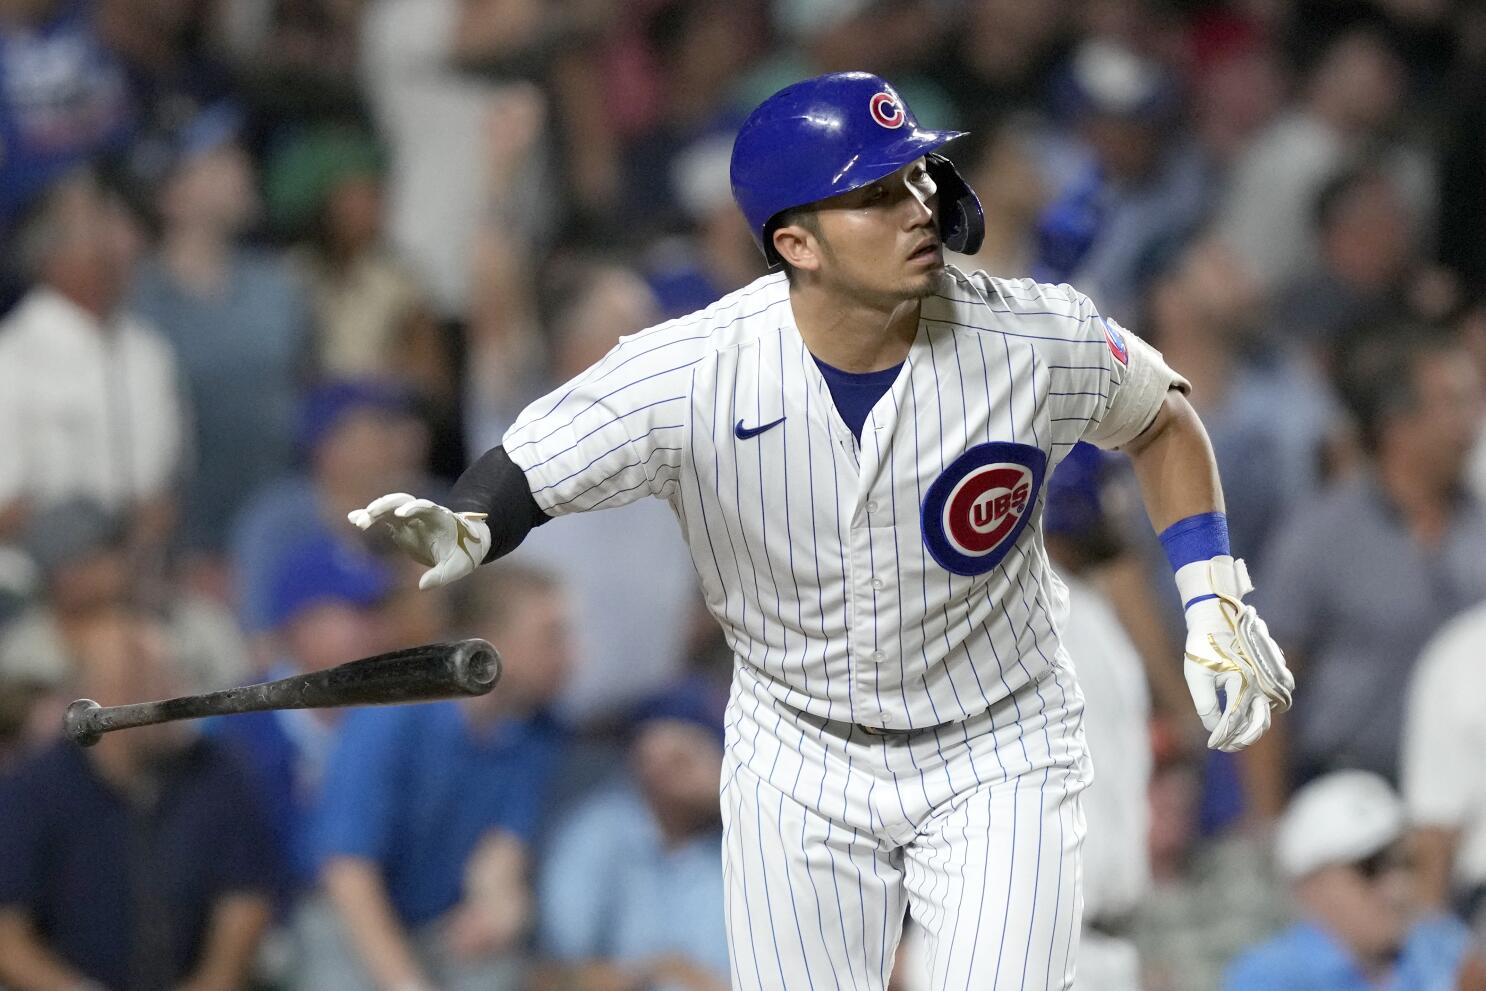 Watch: Cubs' Christopher Morel hits homer in first career MLB at-bat